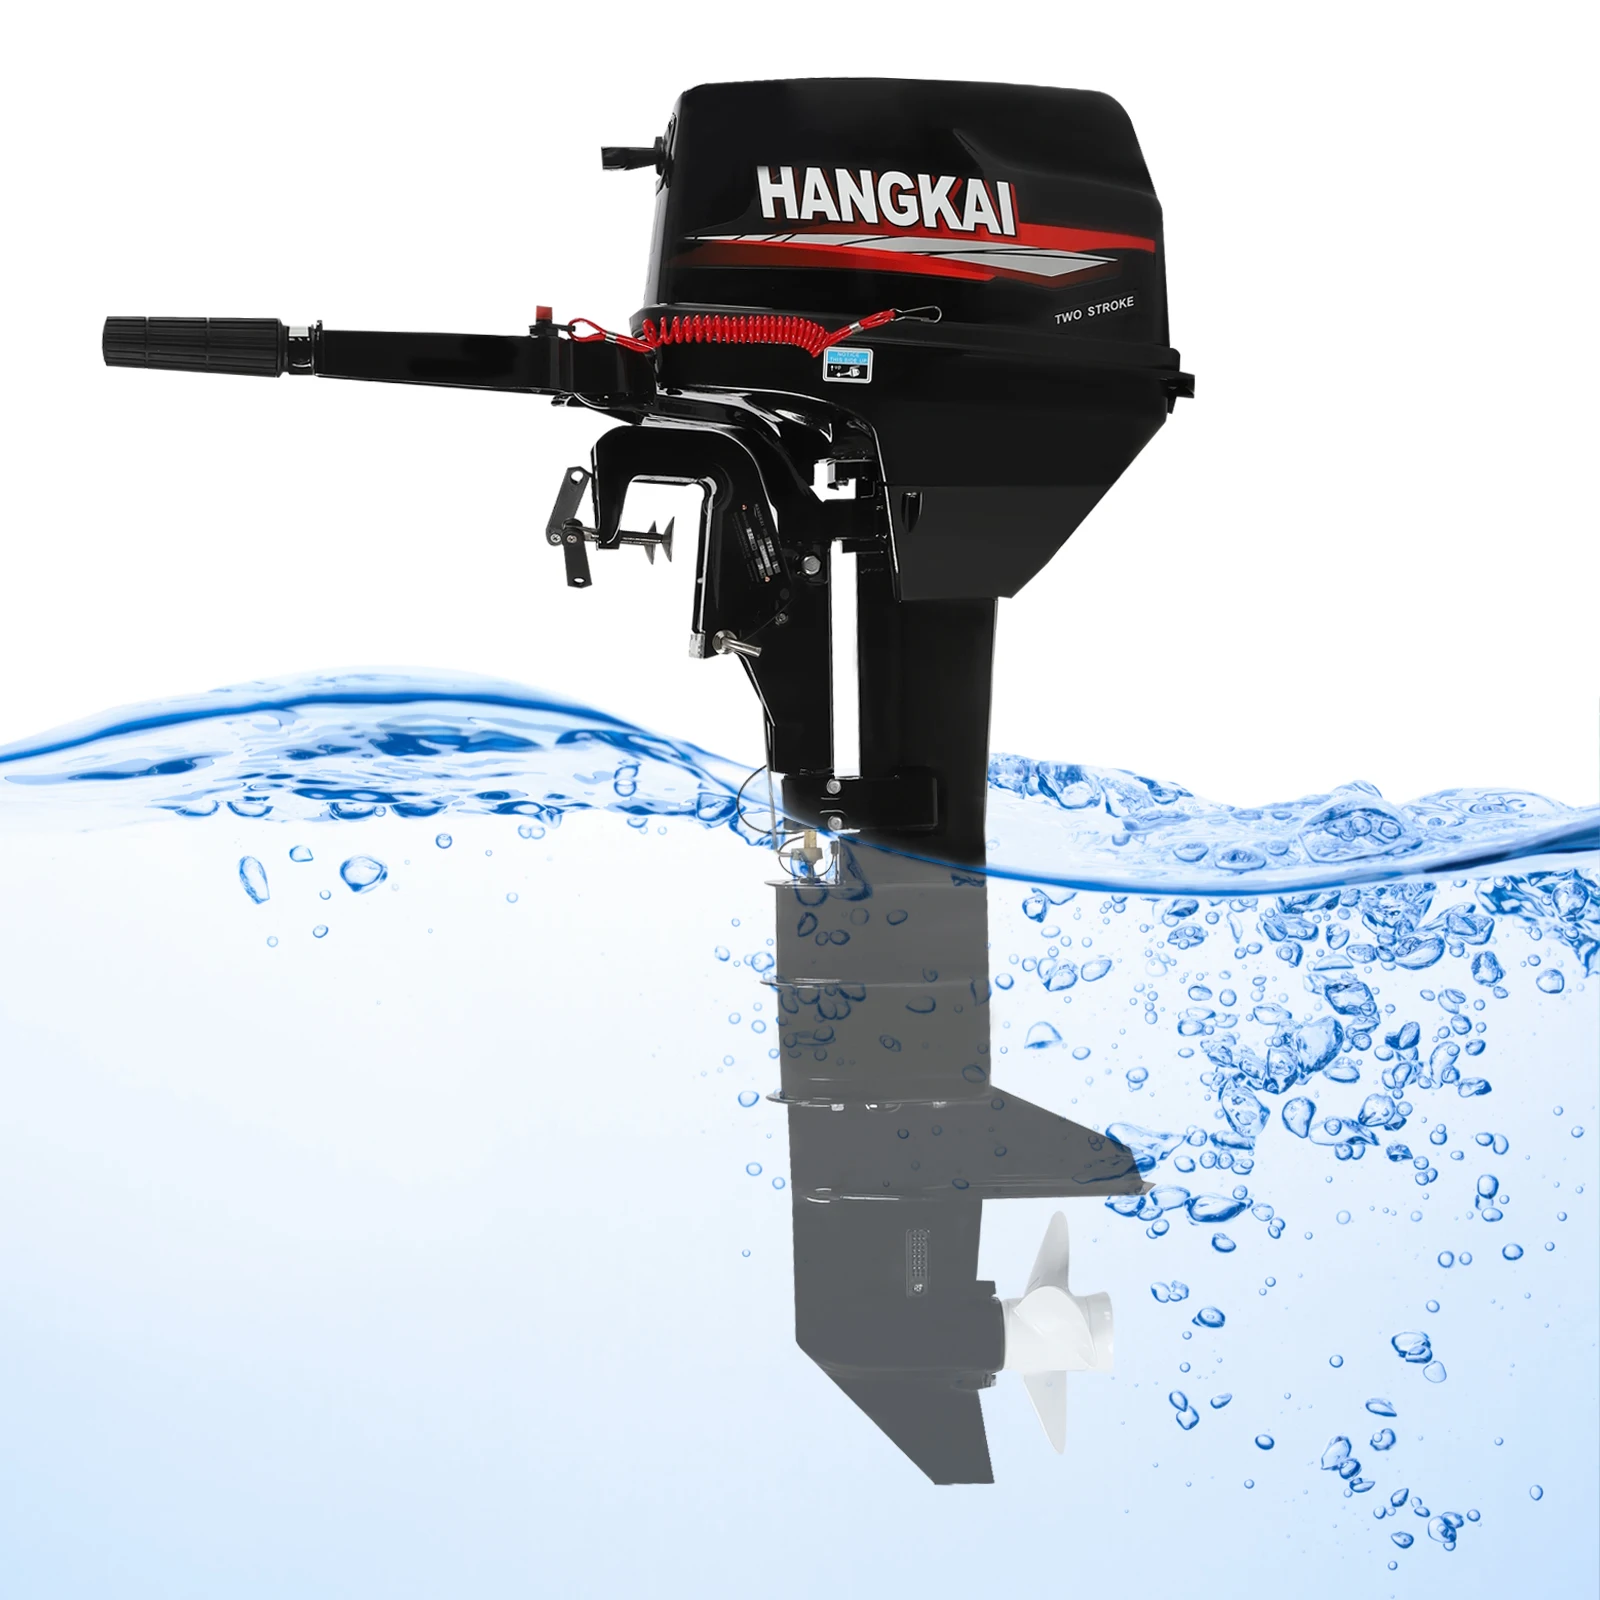 Hangkai  Accesorios For Boats 12hp Boat Outboard Motor Long Shaft, 2 Stroke  Boat Outboard Engine,Water Cooling System heavy duty outboard motor for boats 2 stroke 3 5hp strong power boat engine air cooling system cdi boat accessories marine